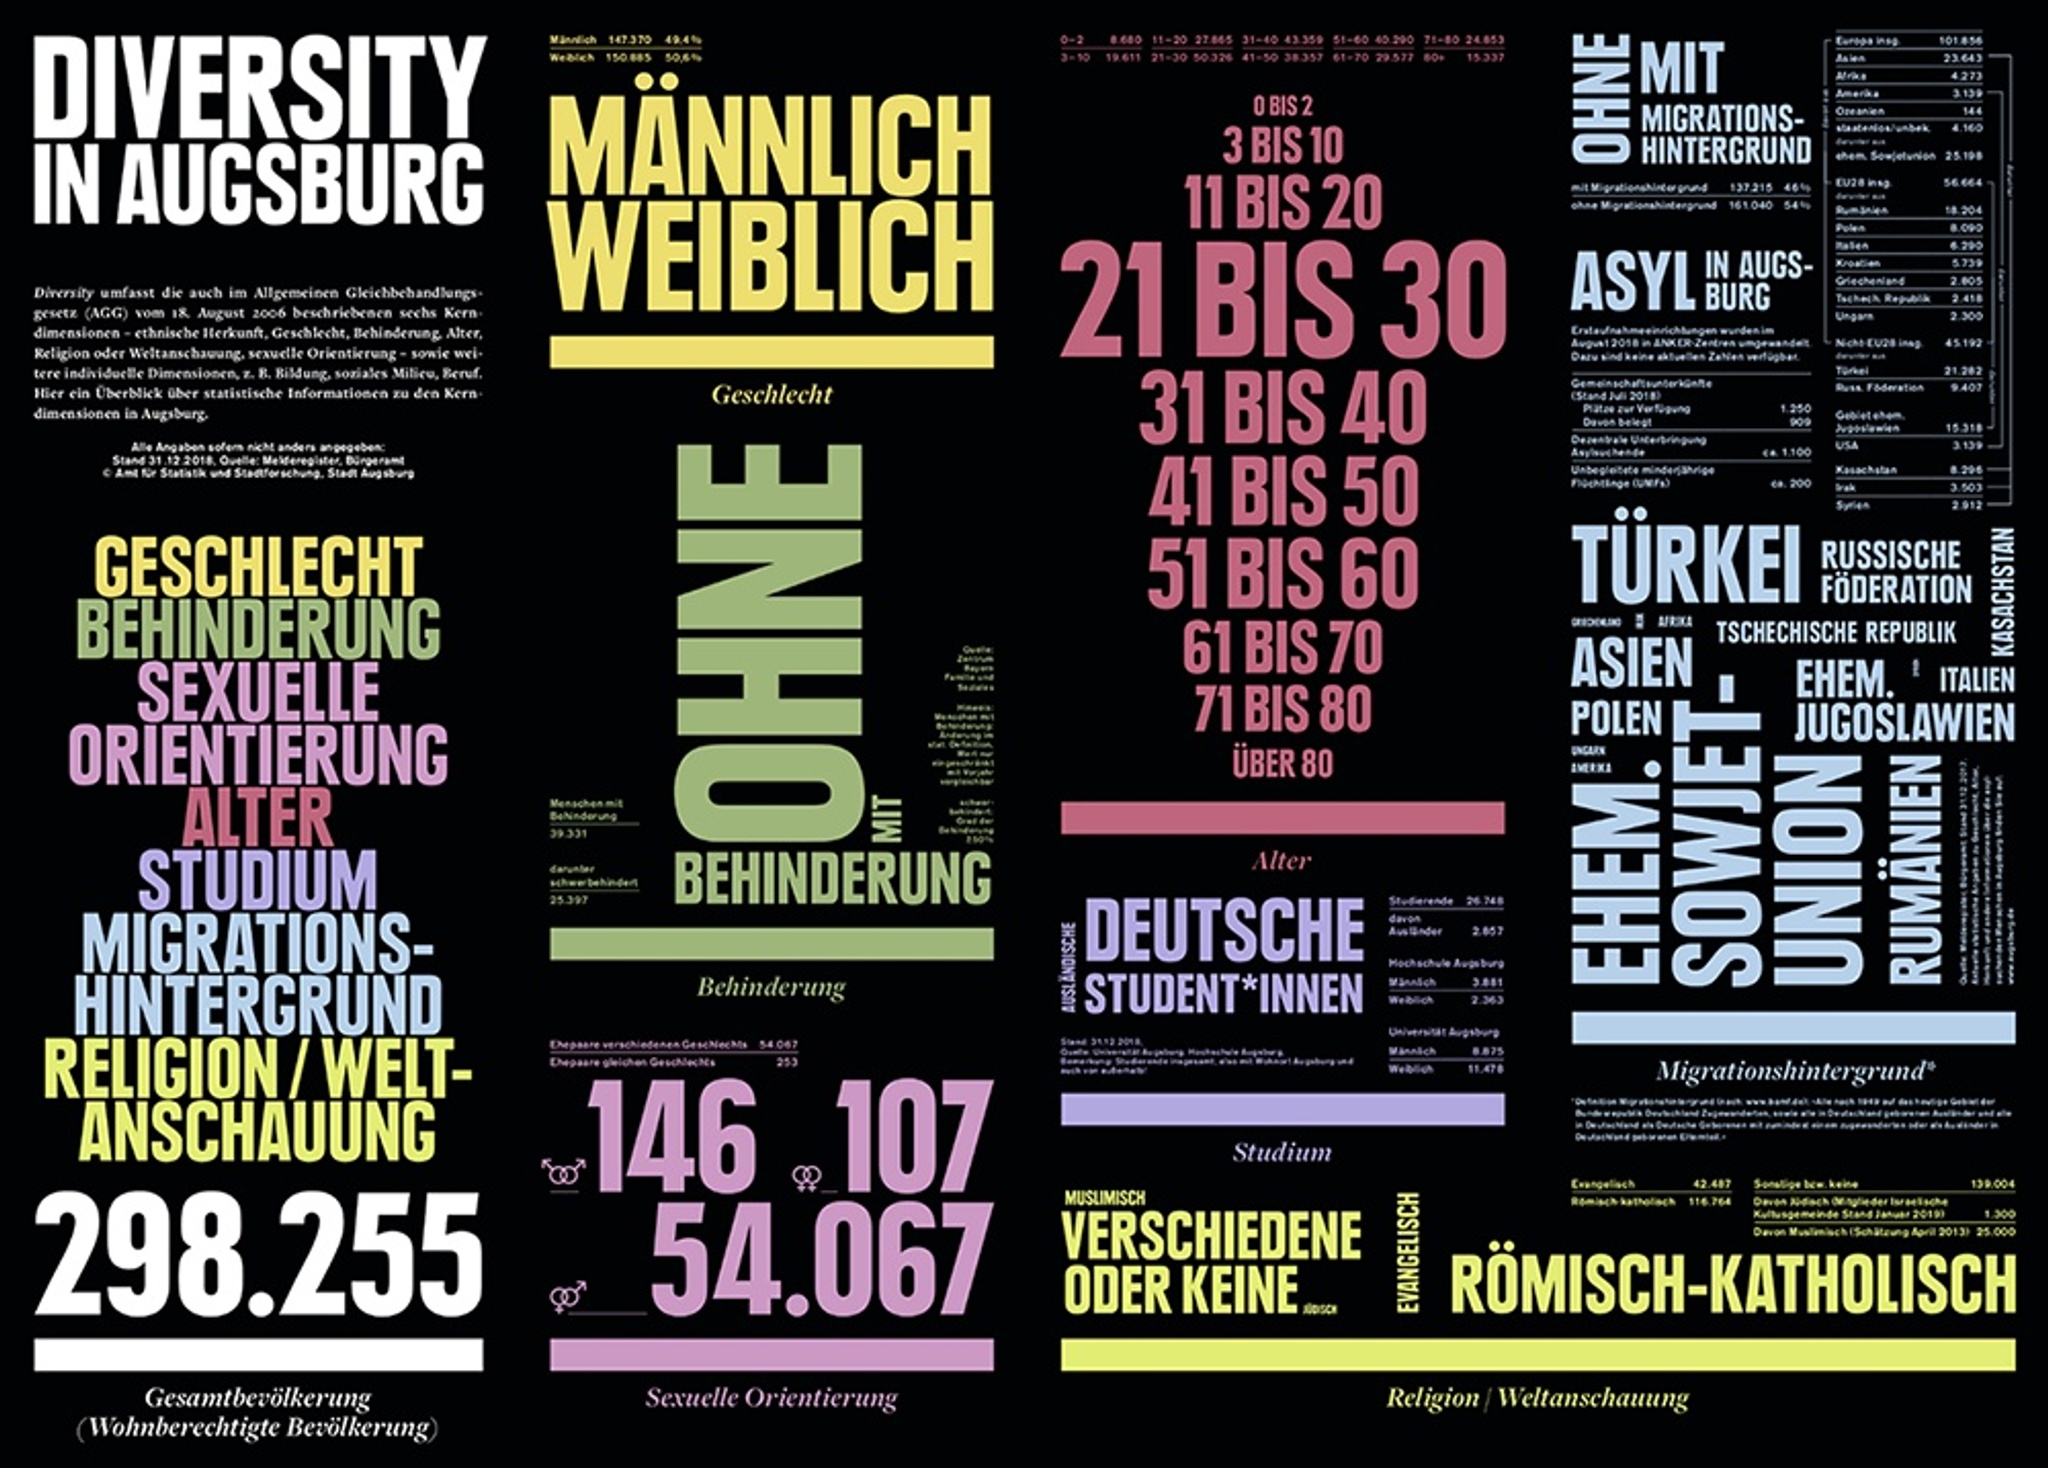 diversity in augsburg facts and figures about all dimensions of diversity